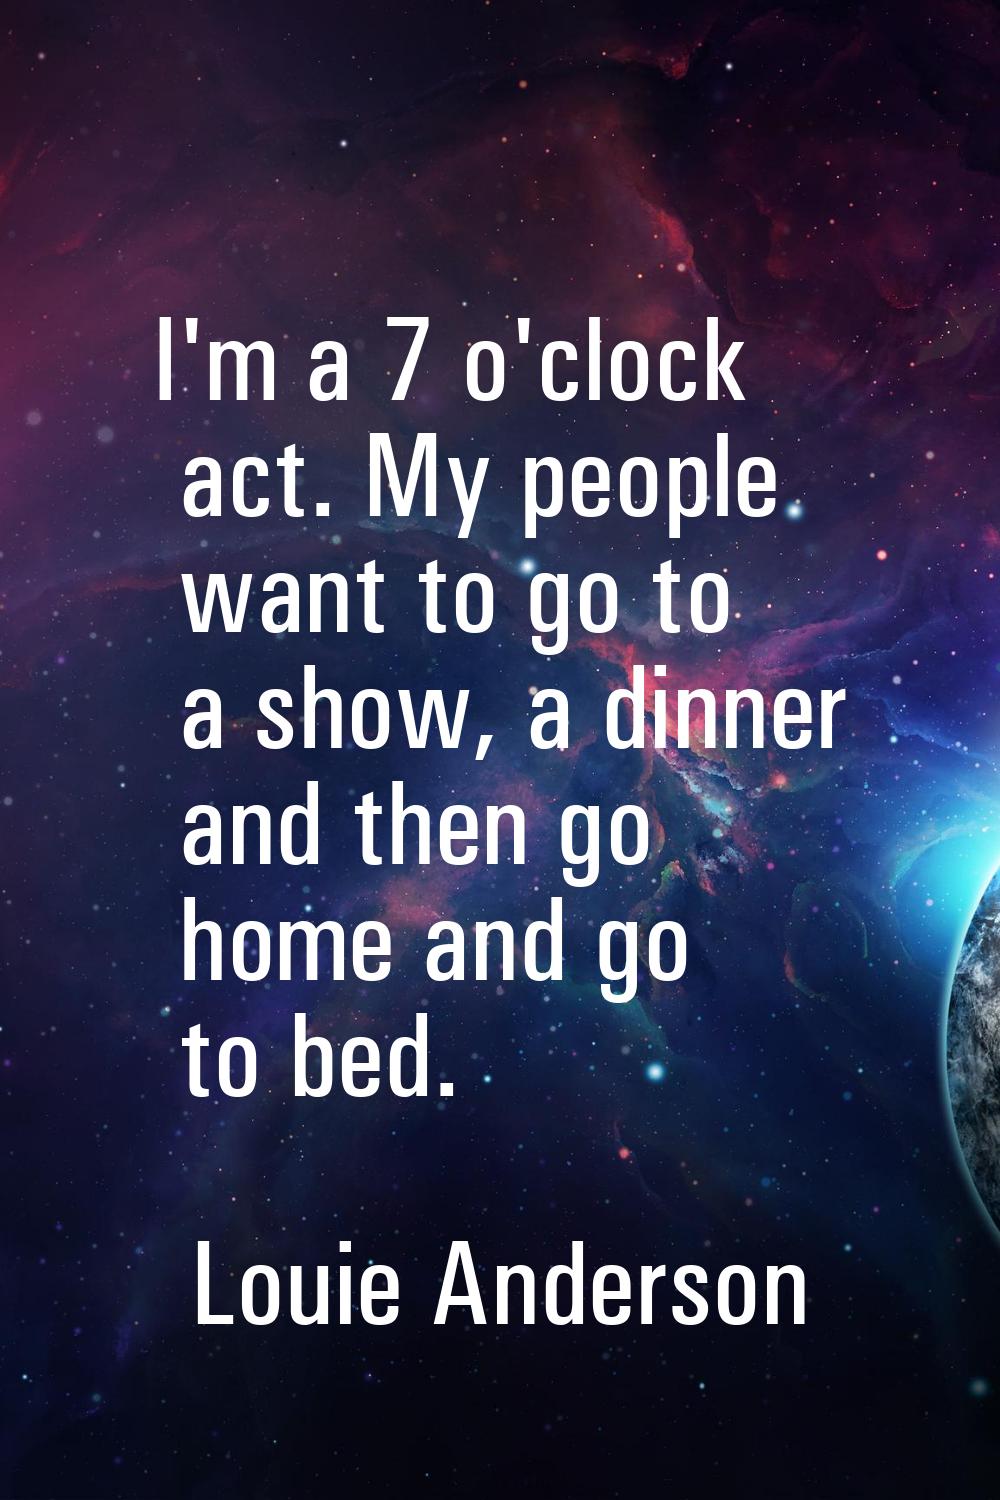 I'm a 7 o'clock act. My people want to go to a show, a dinner and then go home and go to bed.